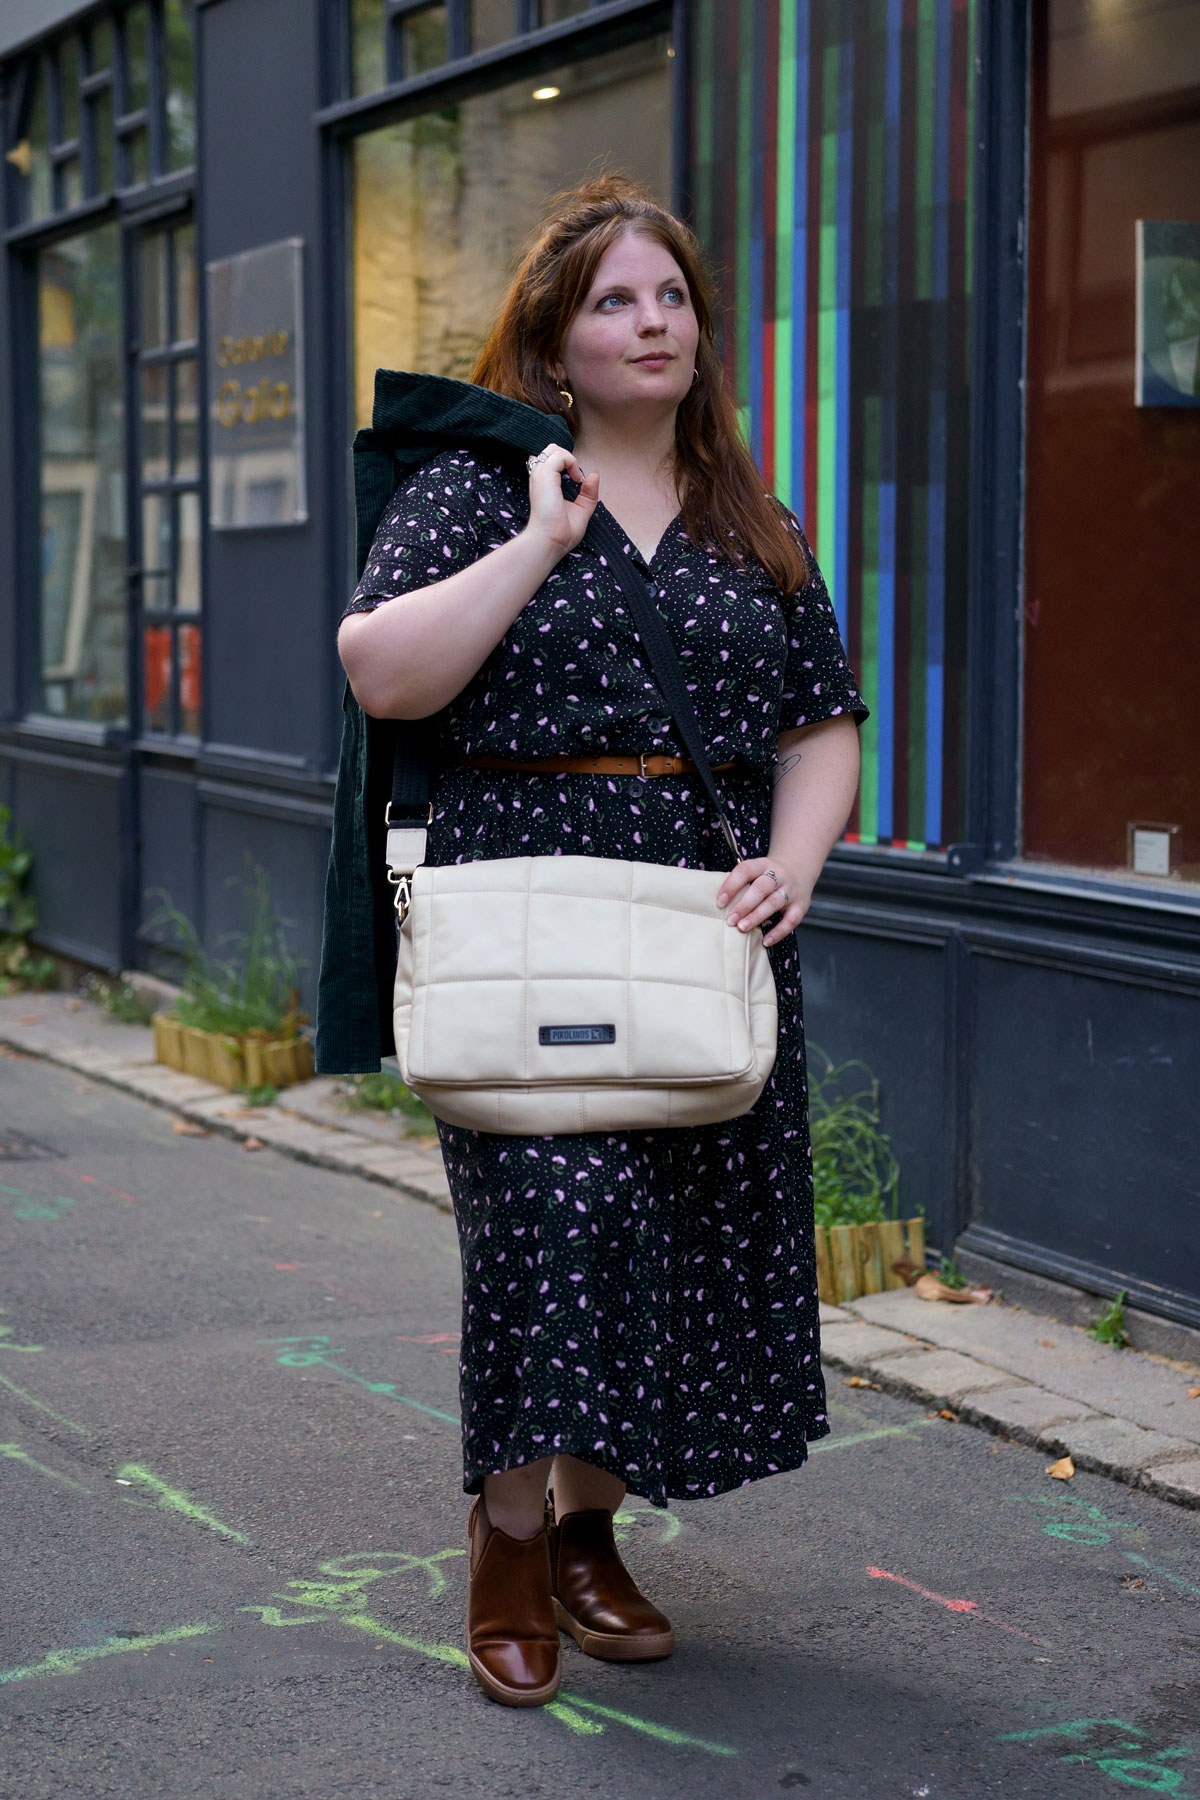 Photograph of Marie with a Pikolinos leather bag